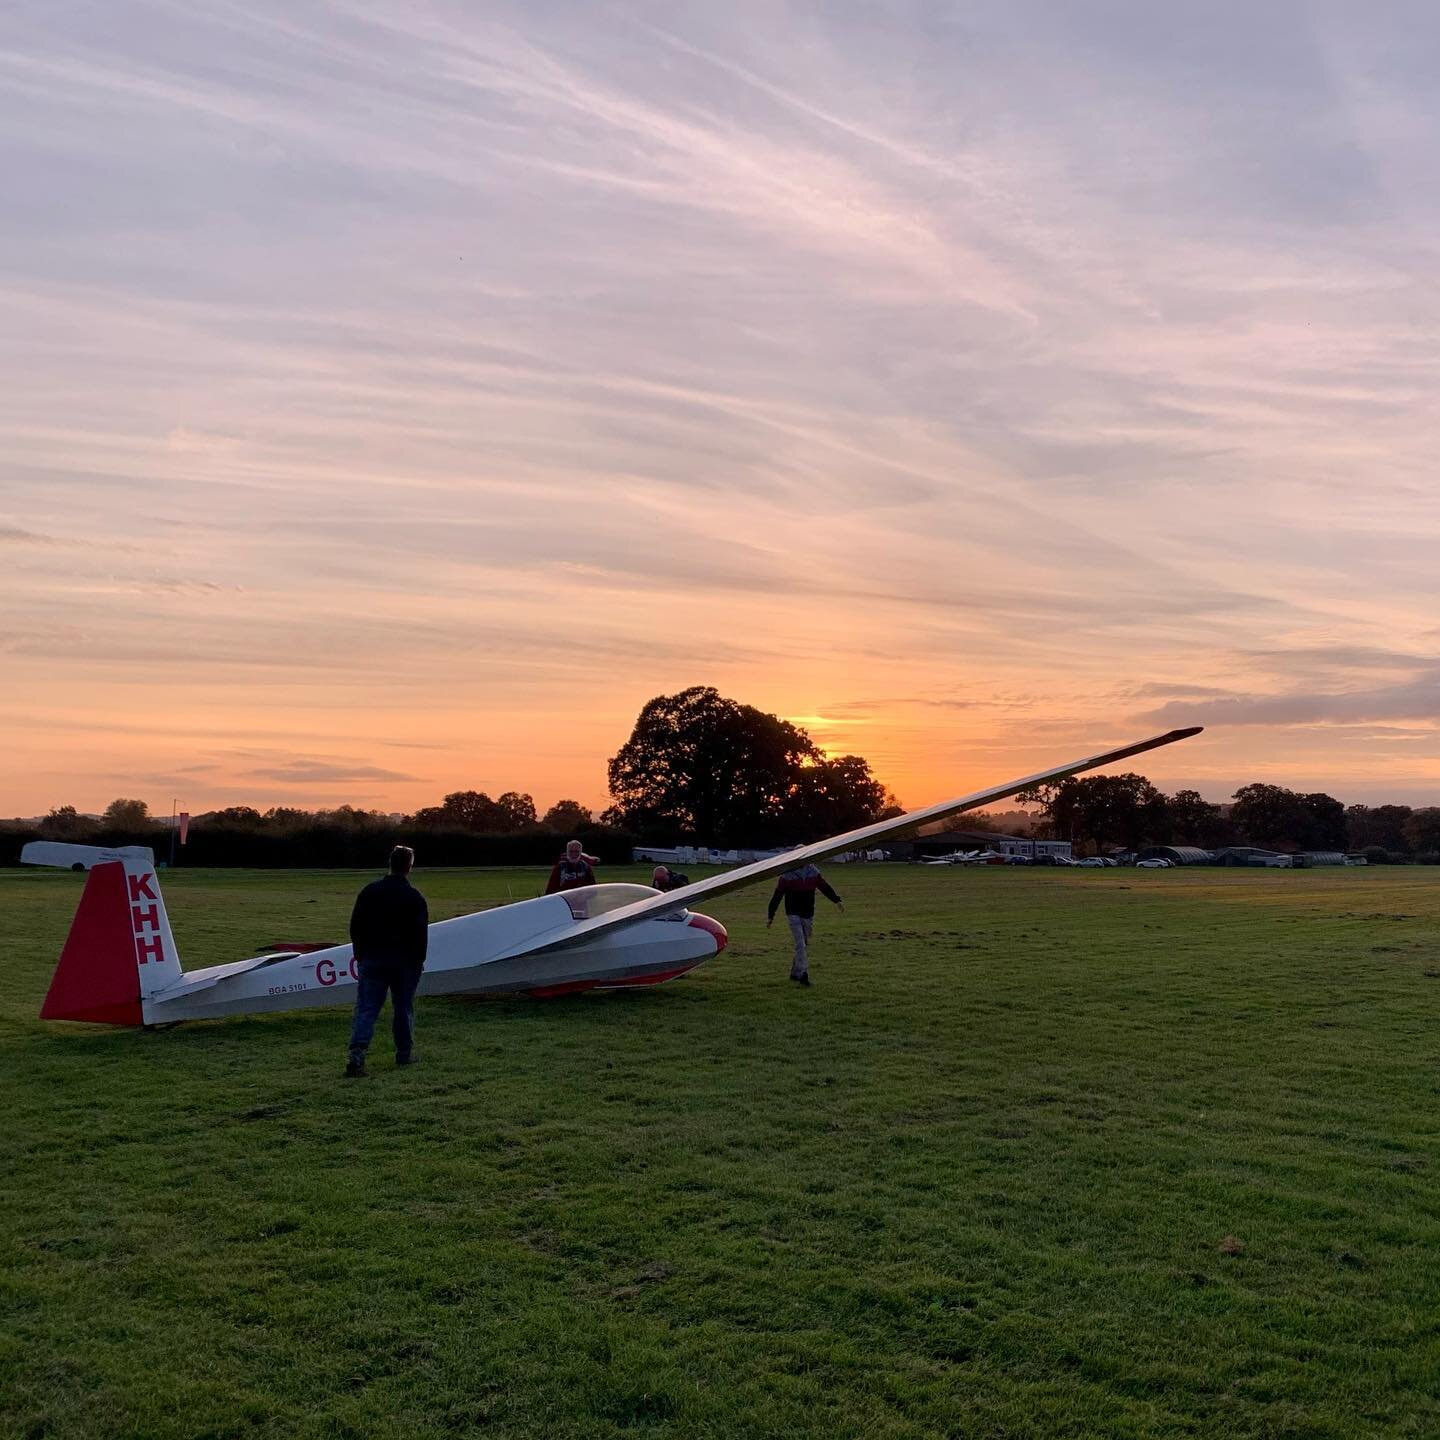 After a rather grim start to the day yesterday, things improved and we had a great day of training using the winch and aerotow. Well done to everyone involved. 

Are you interested in learning to fly? Visit our website for more information. Link in b